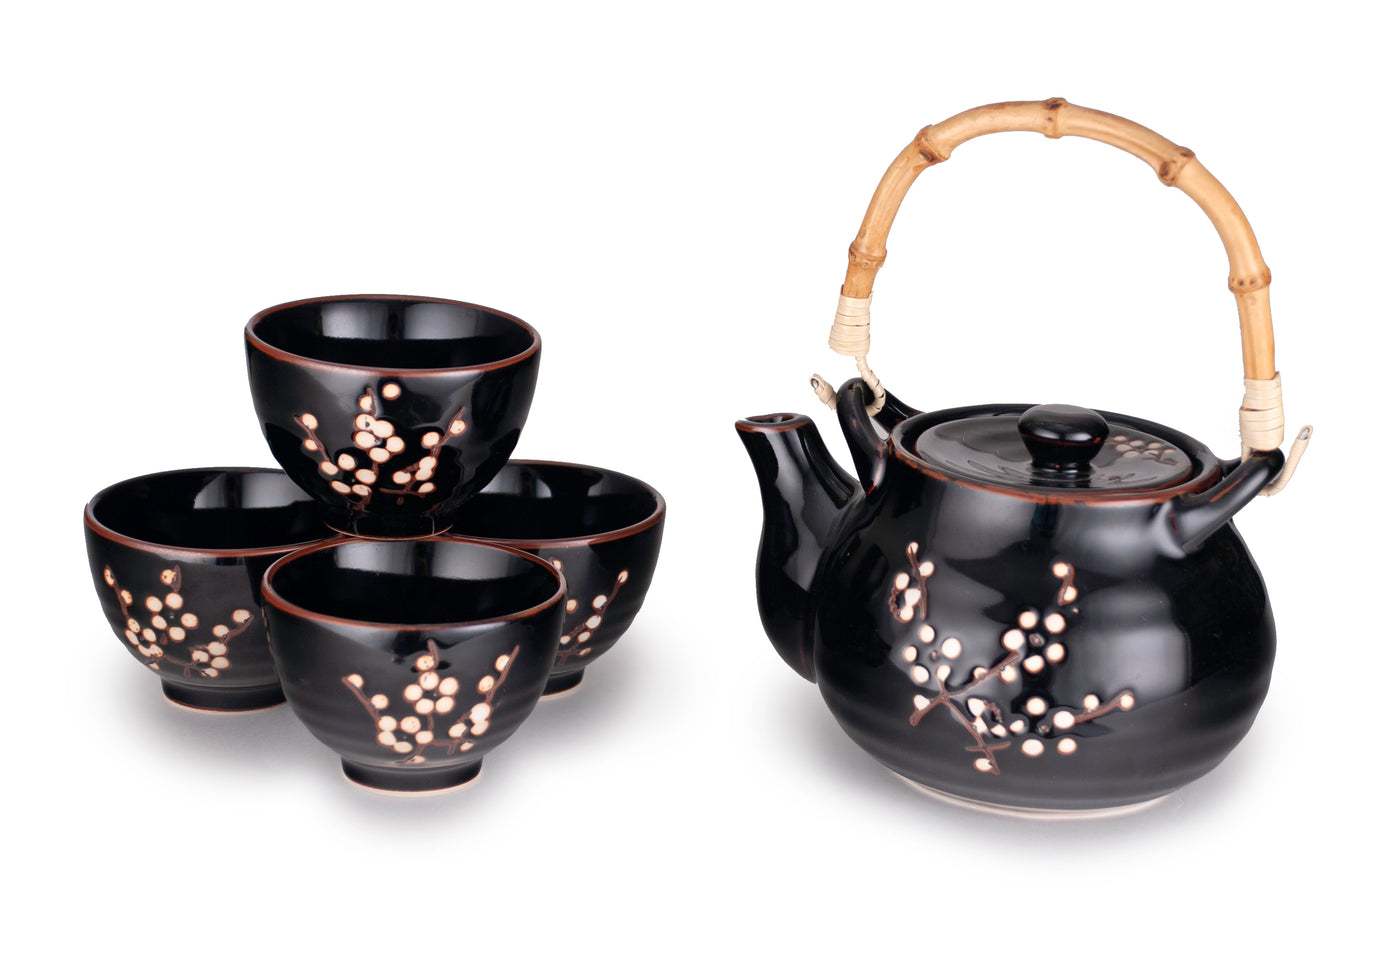 A cherry blossom tea set featuring a ceramic teapot with a natural bamboo handle and four matching cups.